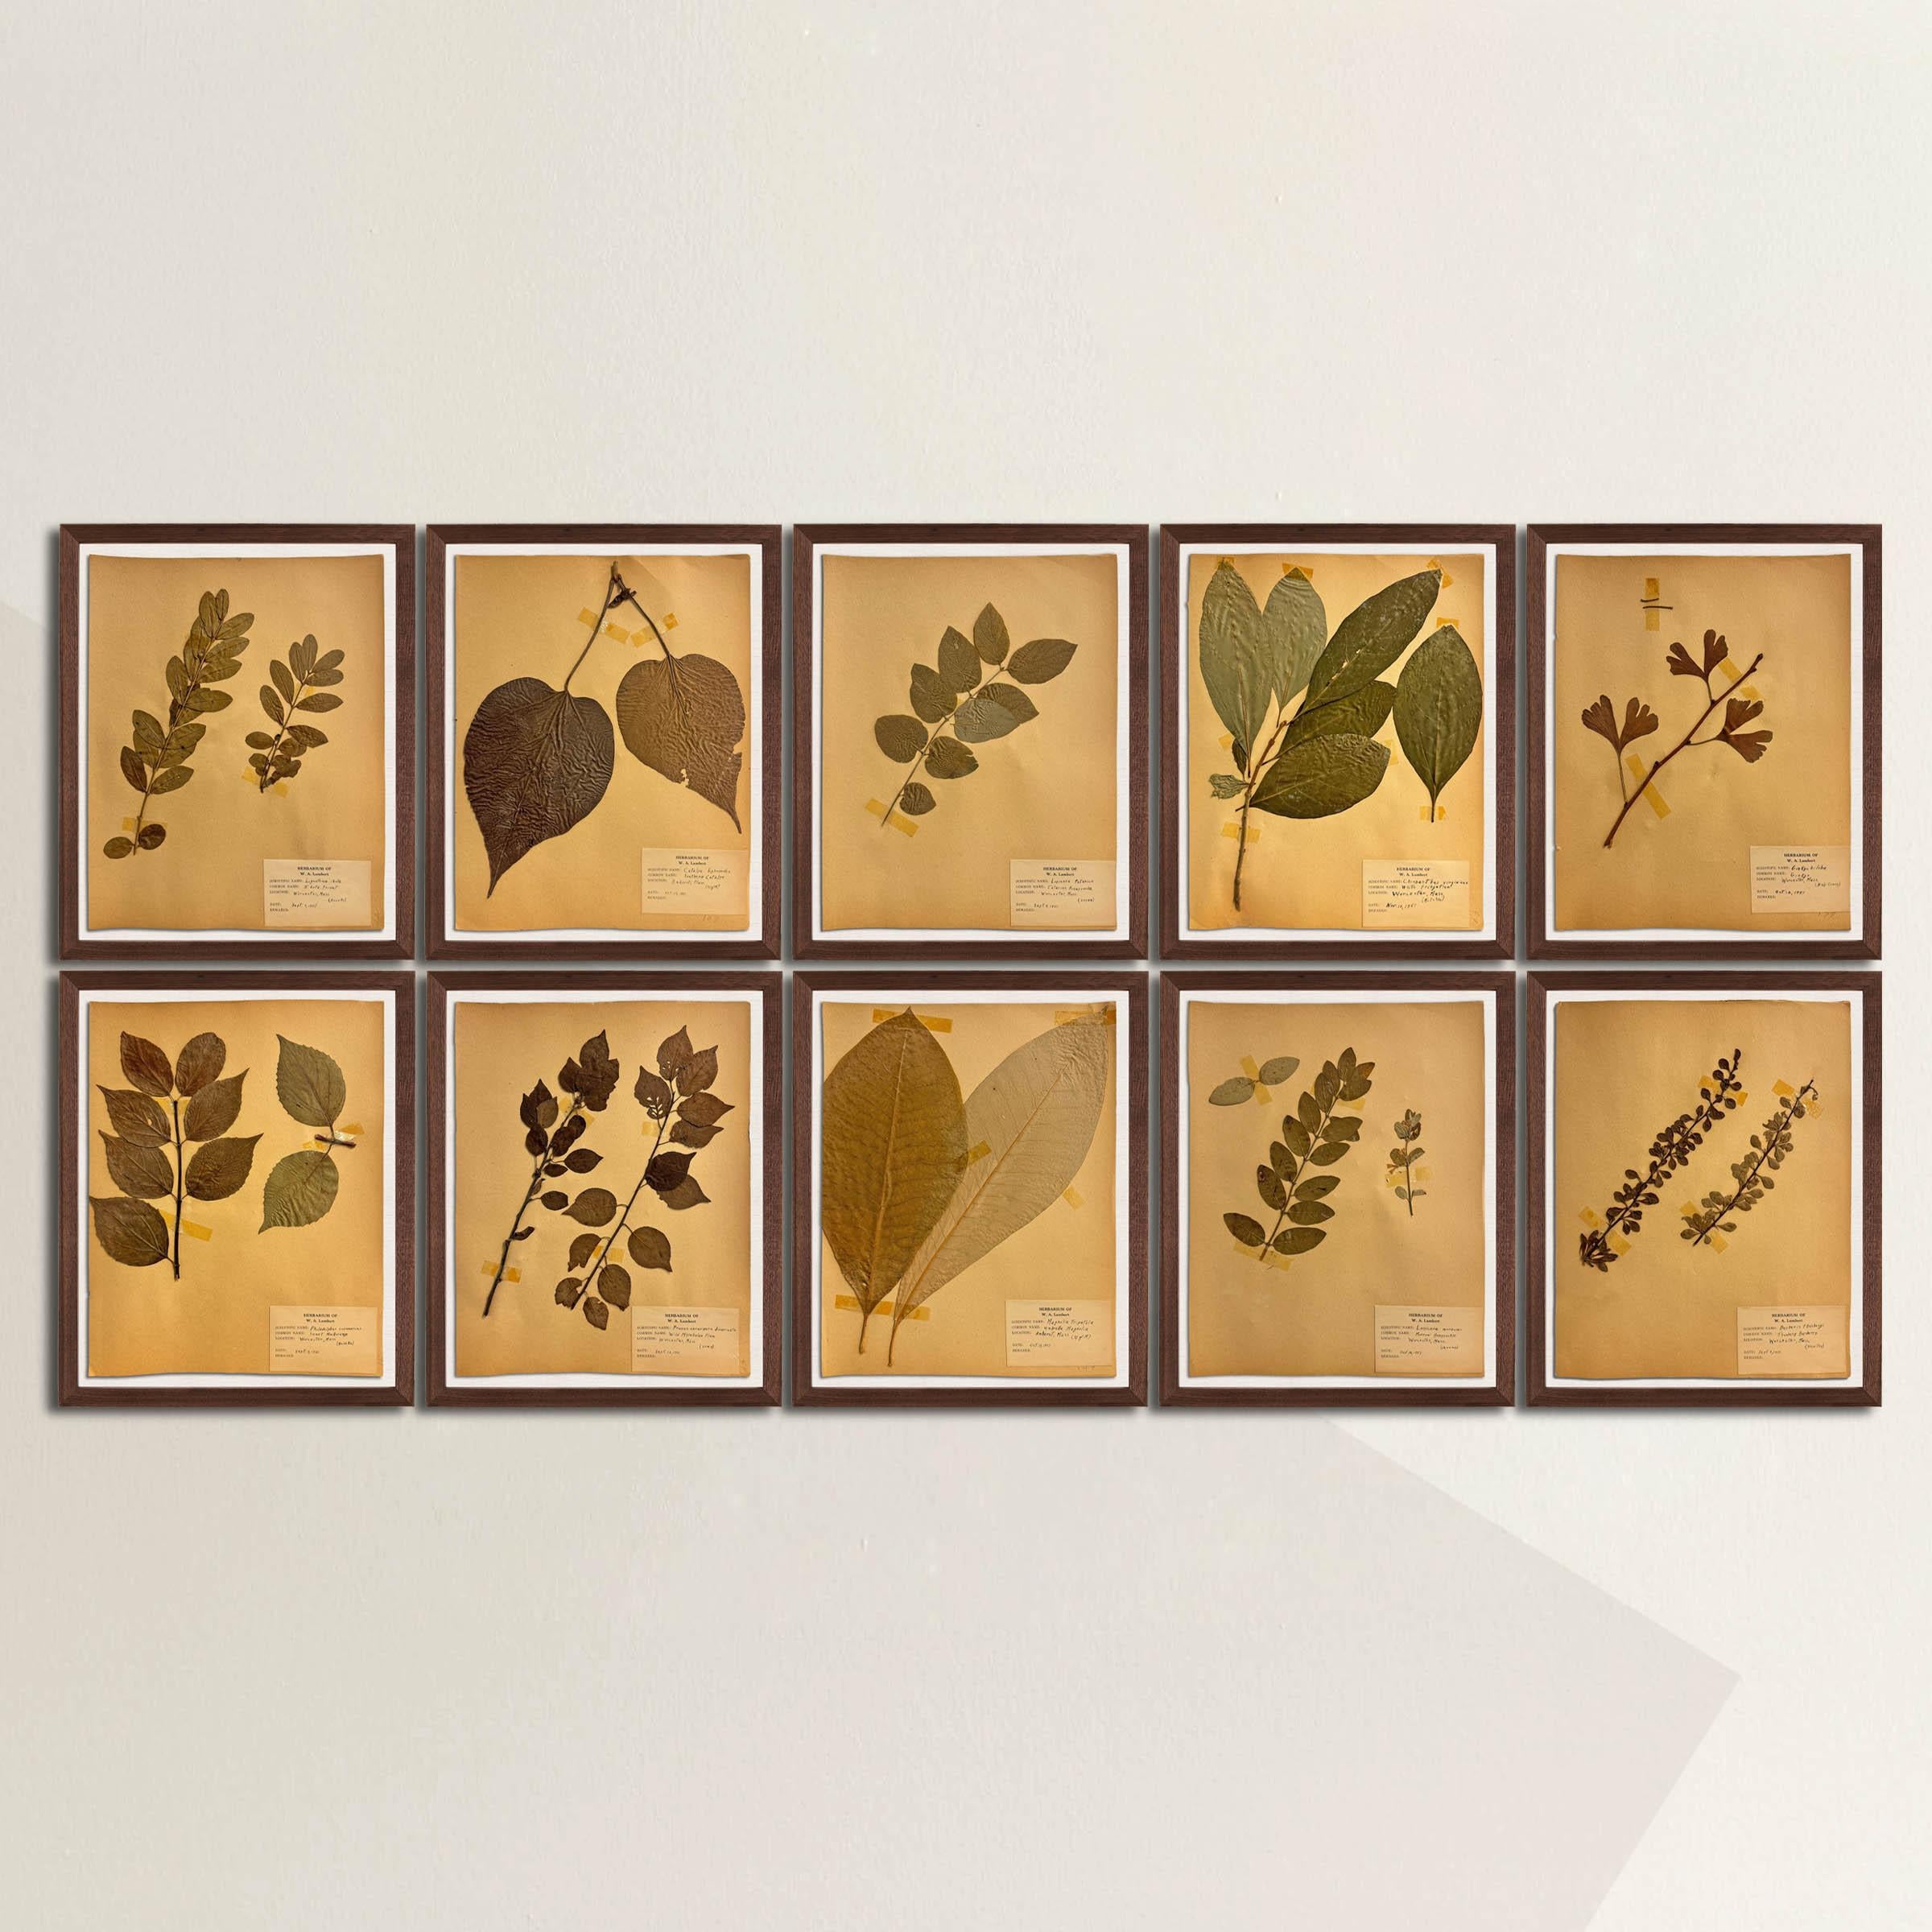 Presenting a collection of ten framed American herbarium botanical specimens, meticulously gathered in 1951 from Amherst and Worcester, MA. Among these specimens are classic garden varietals such as ginkgo, magnolia, honeysuckle, and wild plum